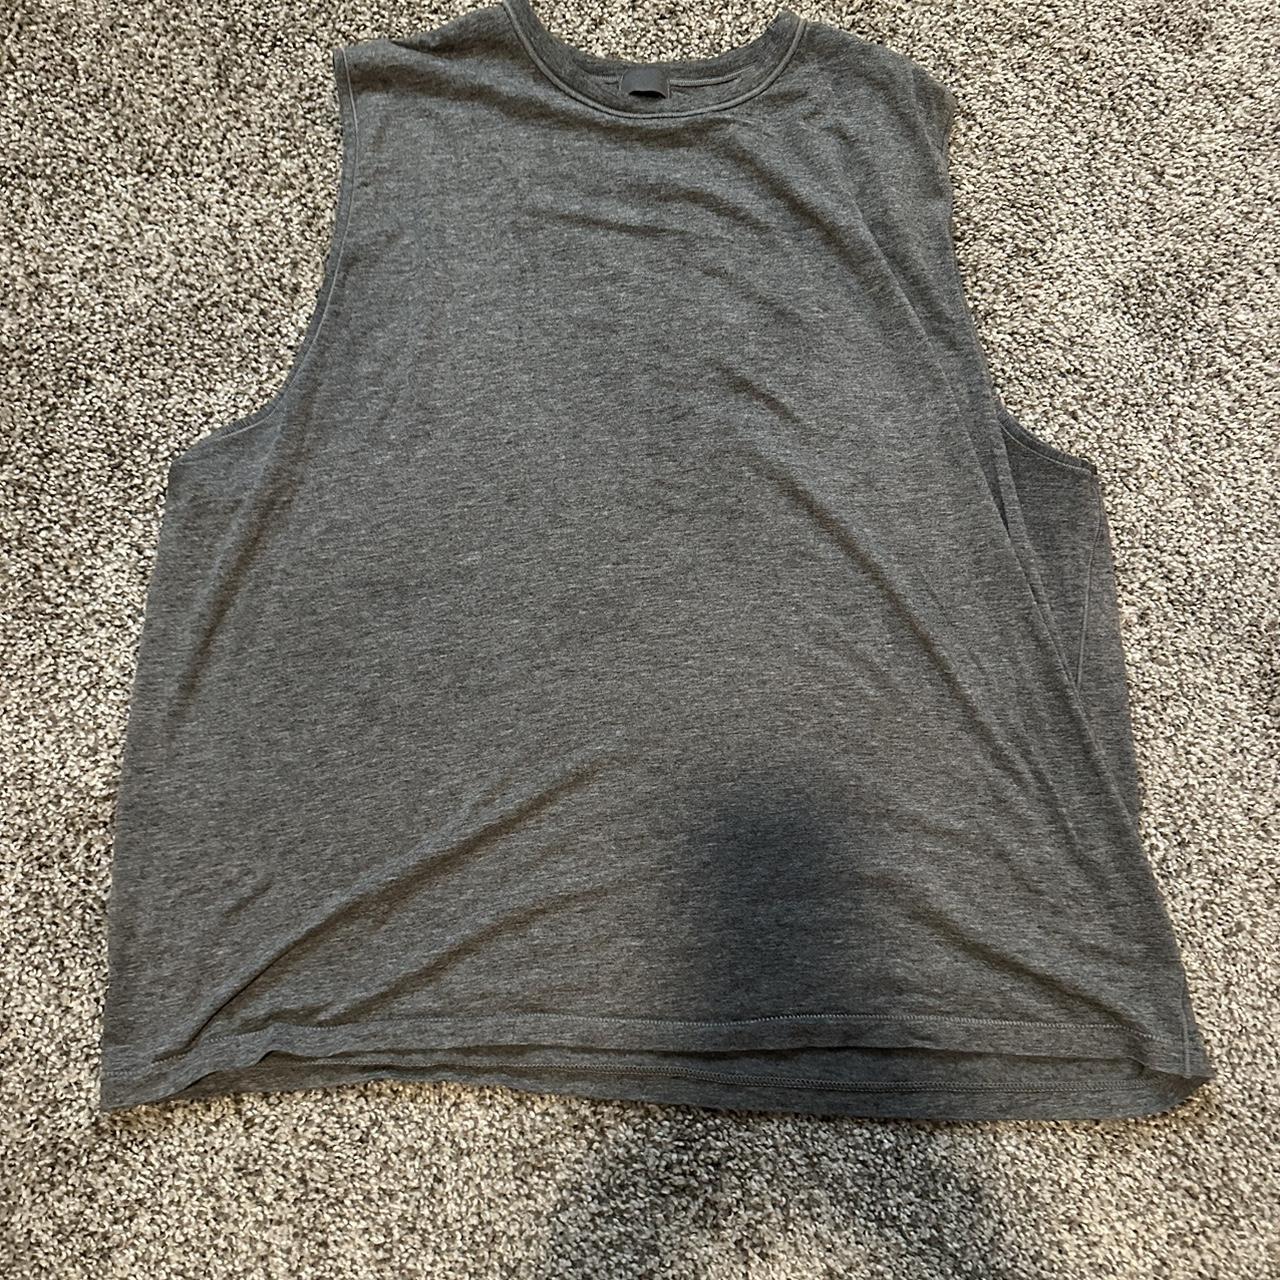 SKIMS grey muscle tank size : Large super soft and... - Depop